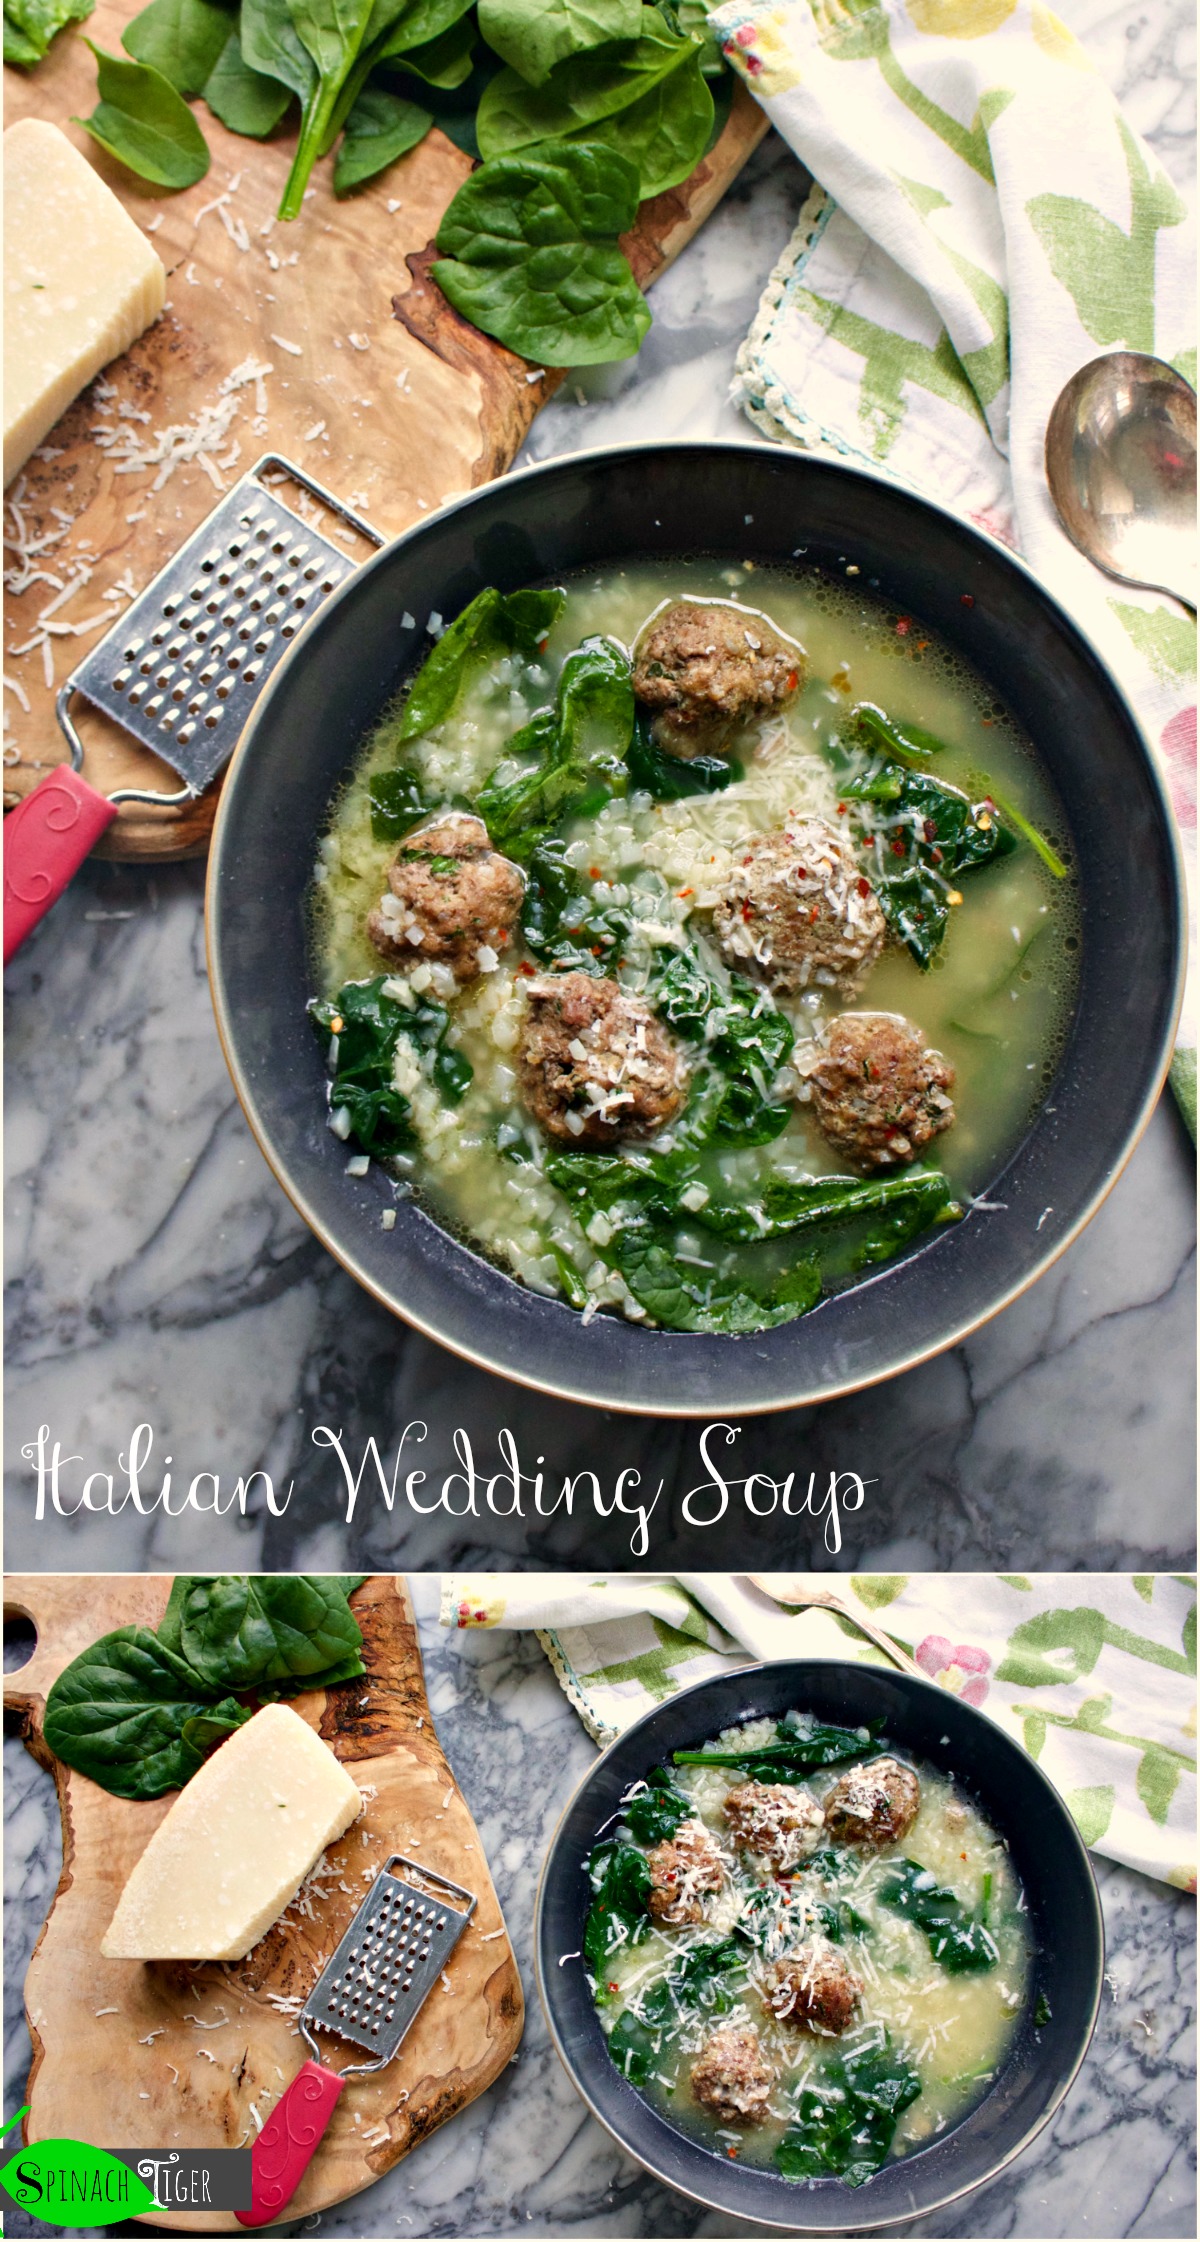 Make Keto Italian Wedding Soup Recipe with Low Carb option from Spinach Tiger